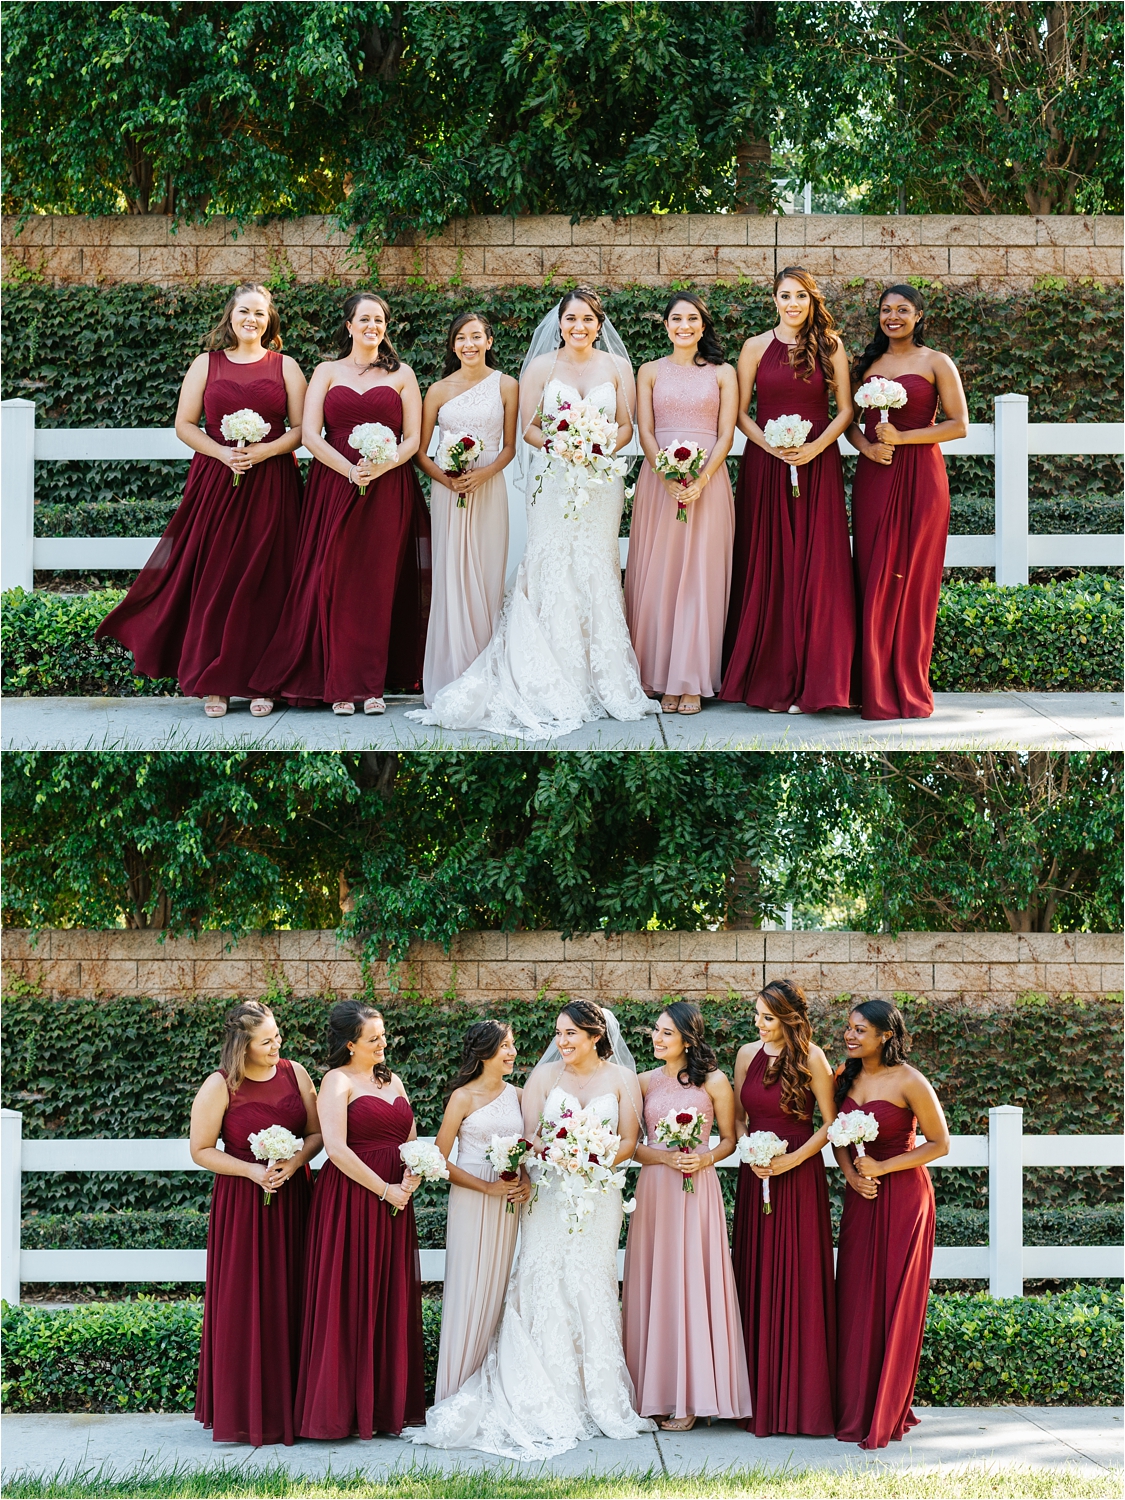 Bride and Bridesmaids Photos - https://brittneyhannonphotography.com